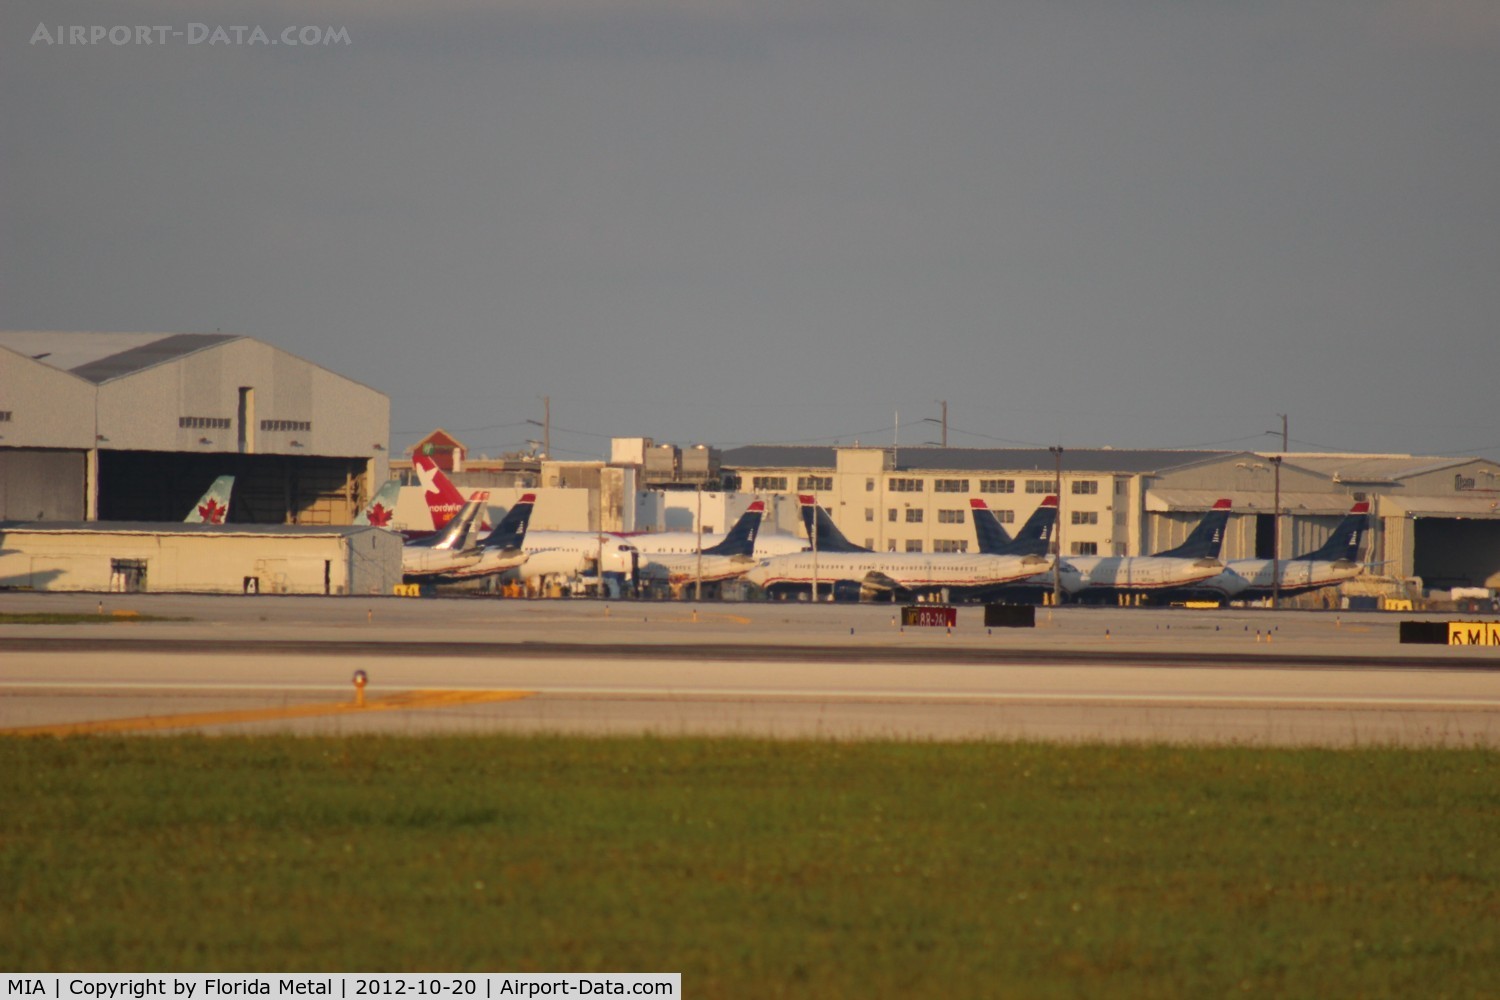 Miami International Airport (MIA) - Line up of ex US Airways 737-300s possibly bound for a new owner